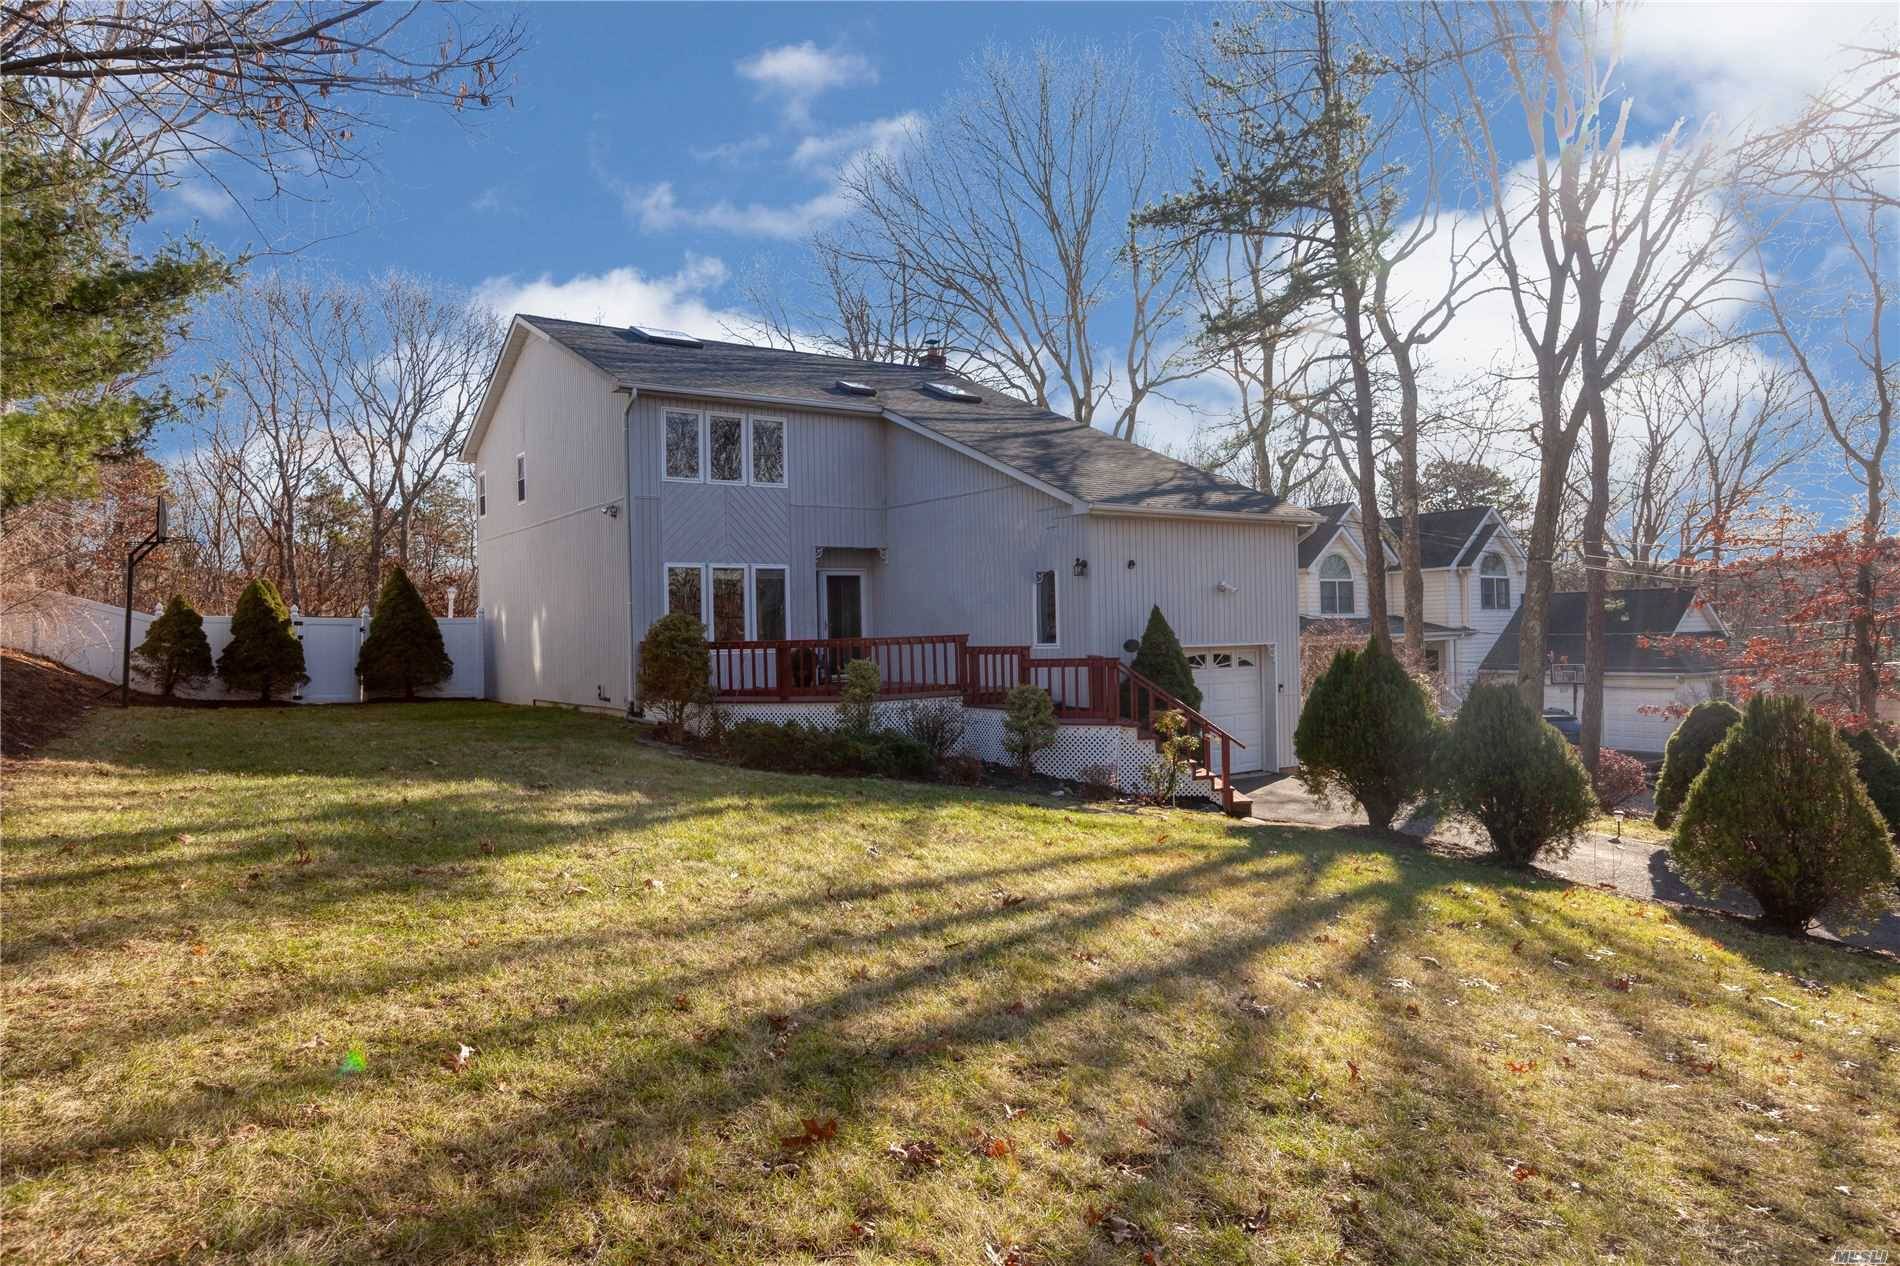 Beautifully Renovated Colonial located in Smithtown Pines.